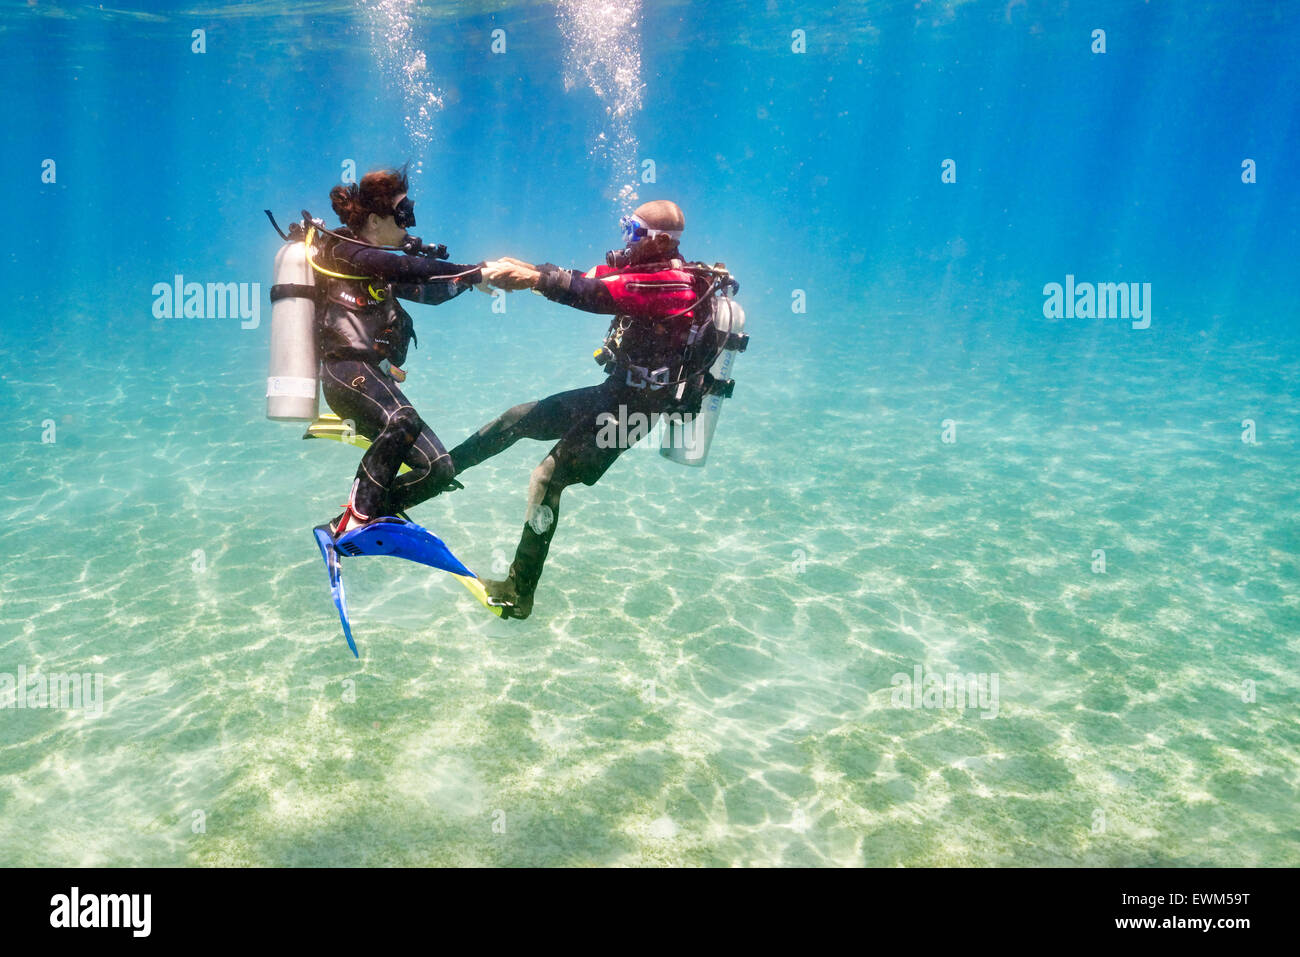 Dive instructor with novice diver, first underwater dive, Marsa Alam, Red Sea, Egypt Stock Photo